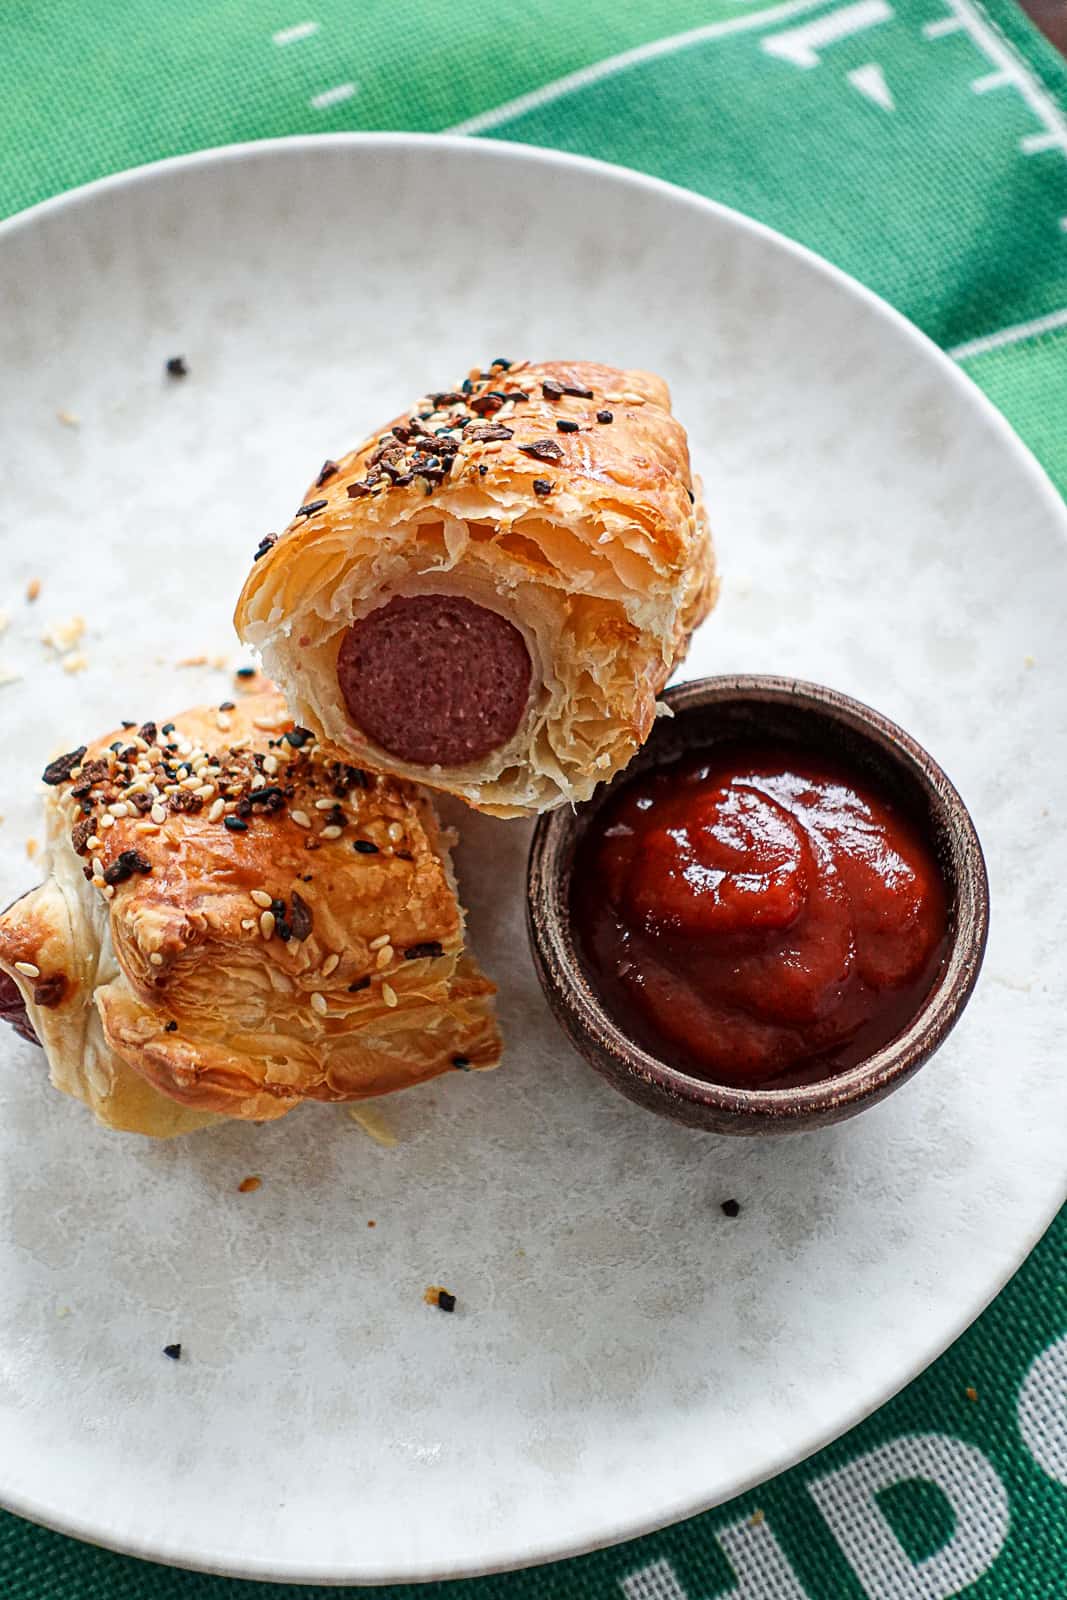 Sliced Puff Pastry Wrapped Hot Dog